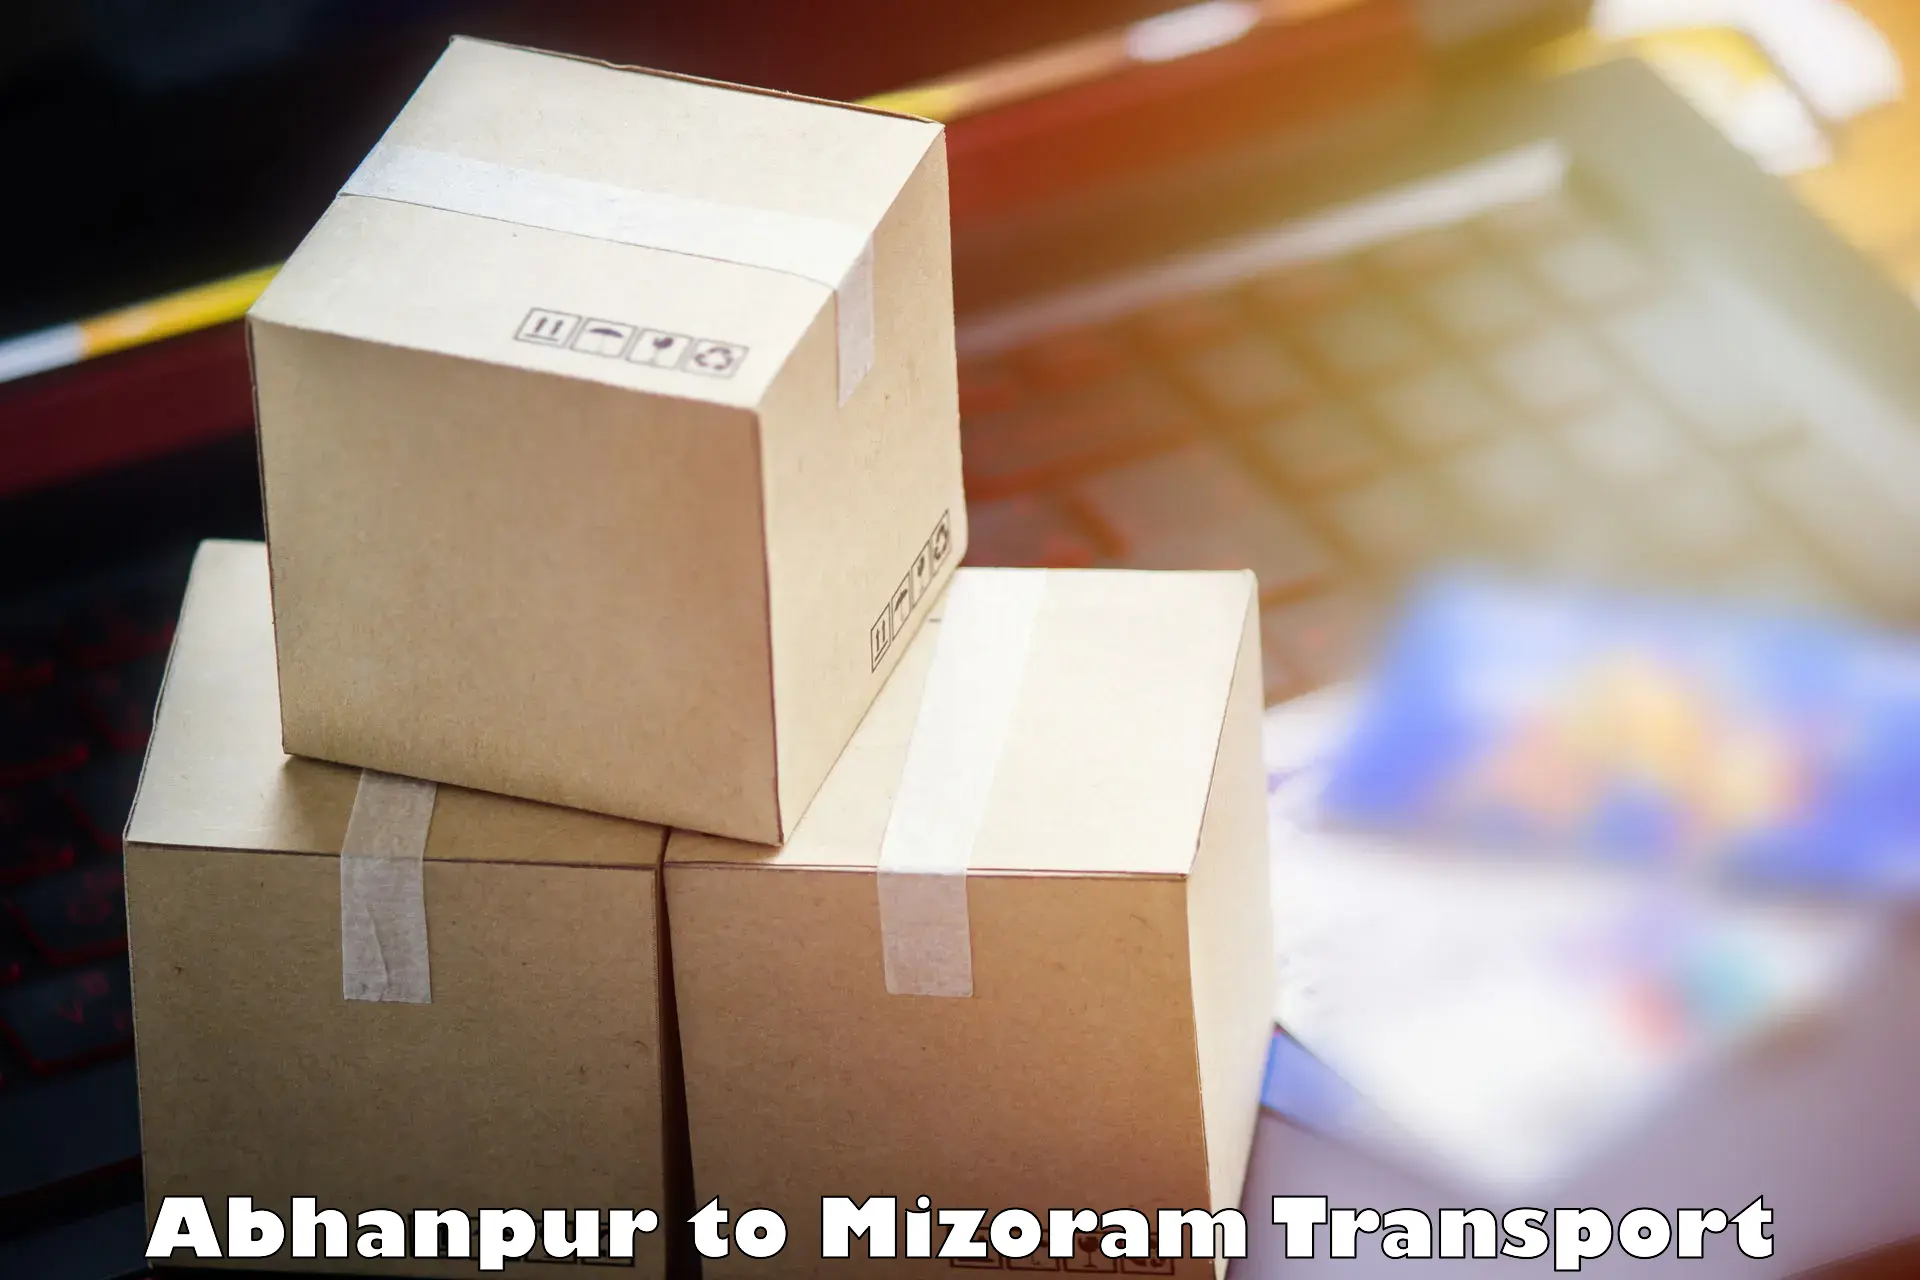 Parcel transport services Abhanpur to Aizawl